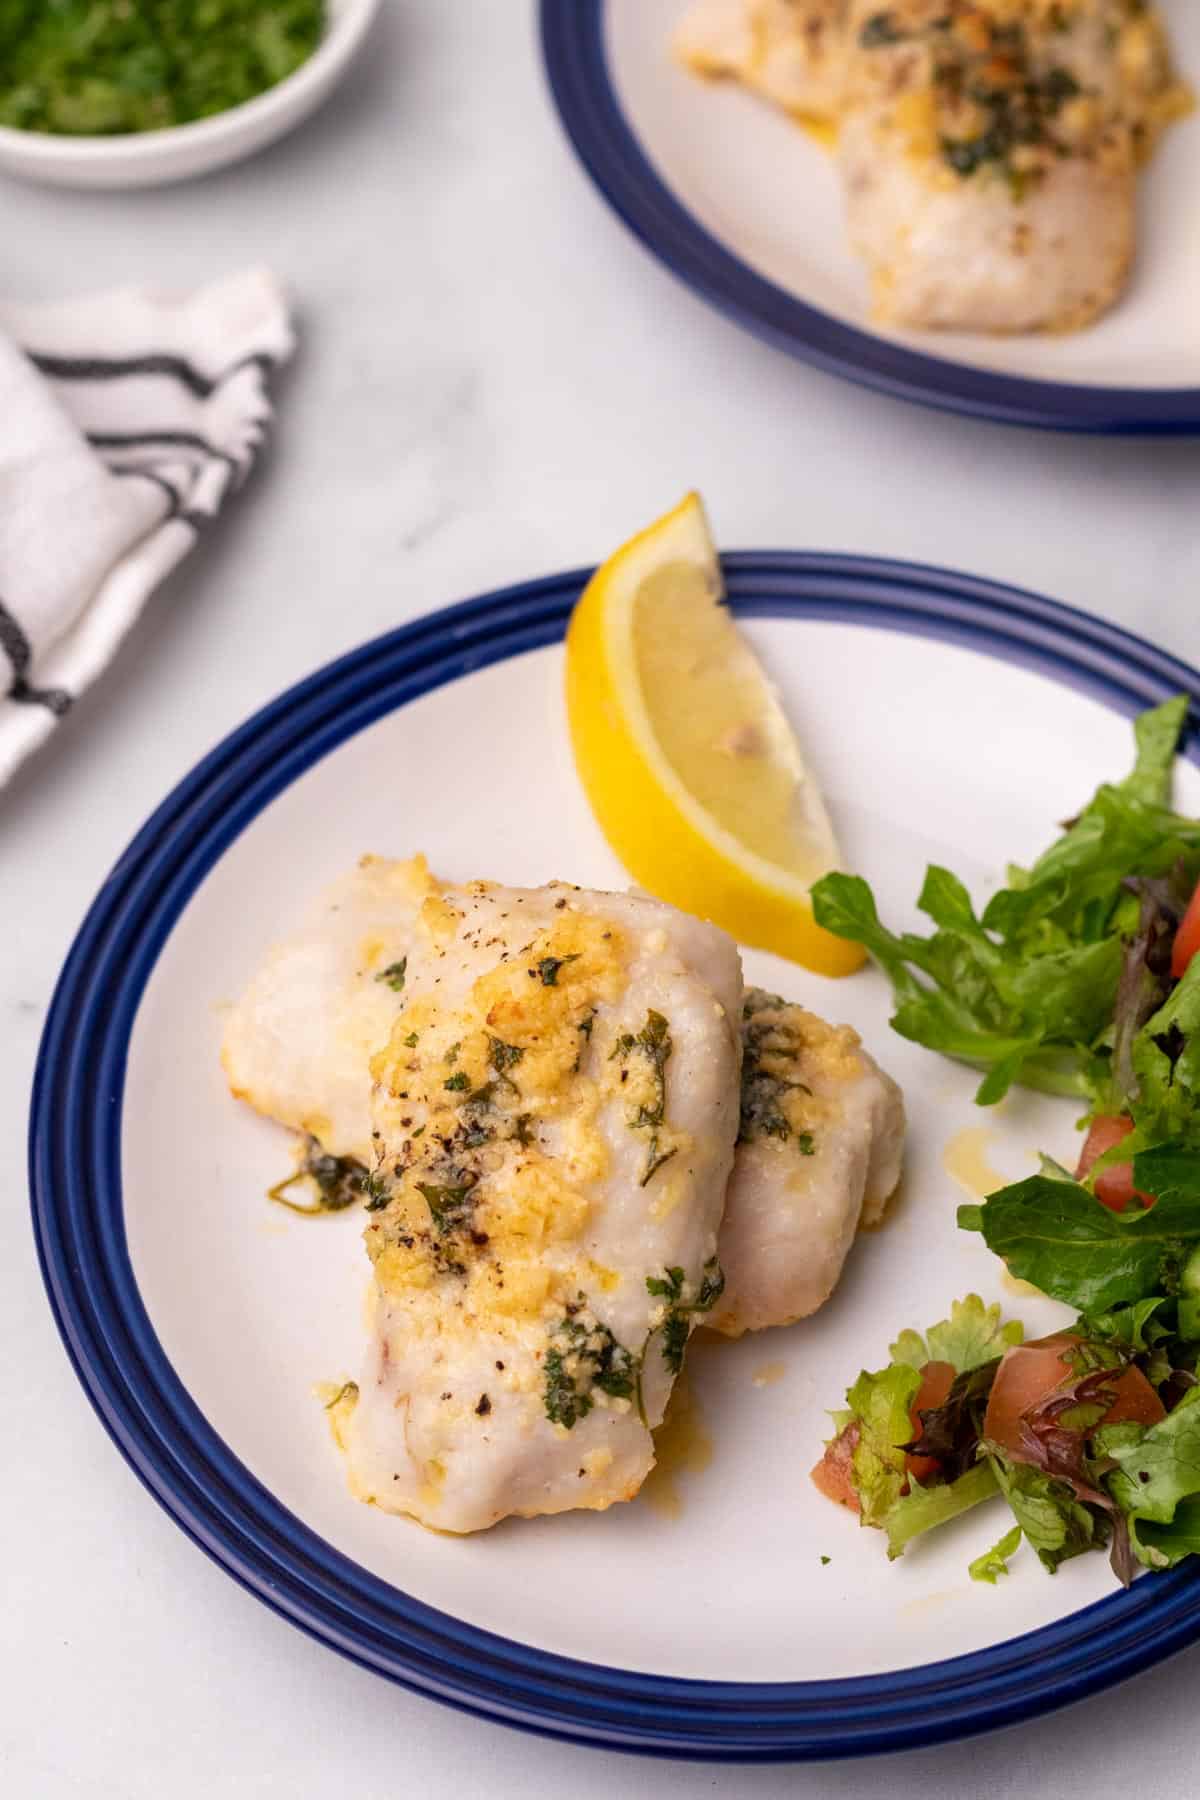 Two cod filets on a plate with a lemon wedge and a salad